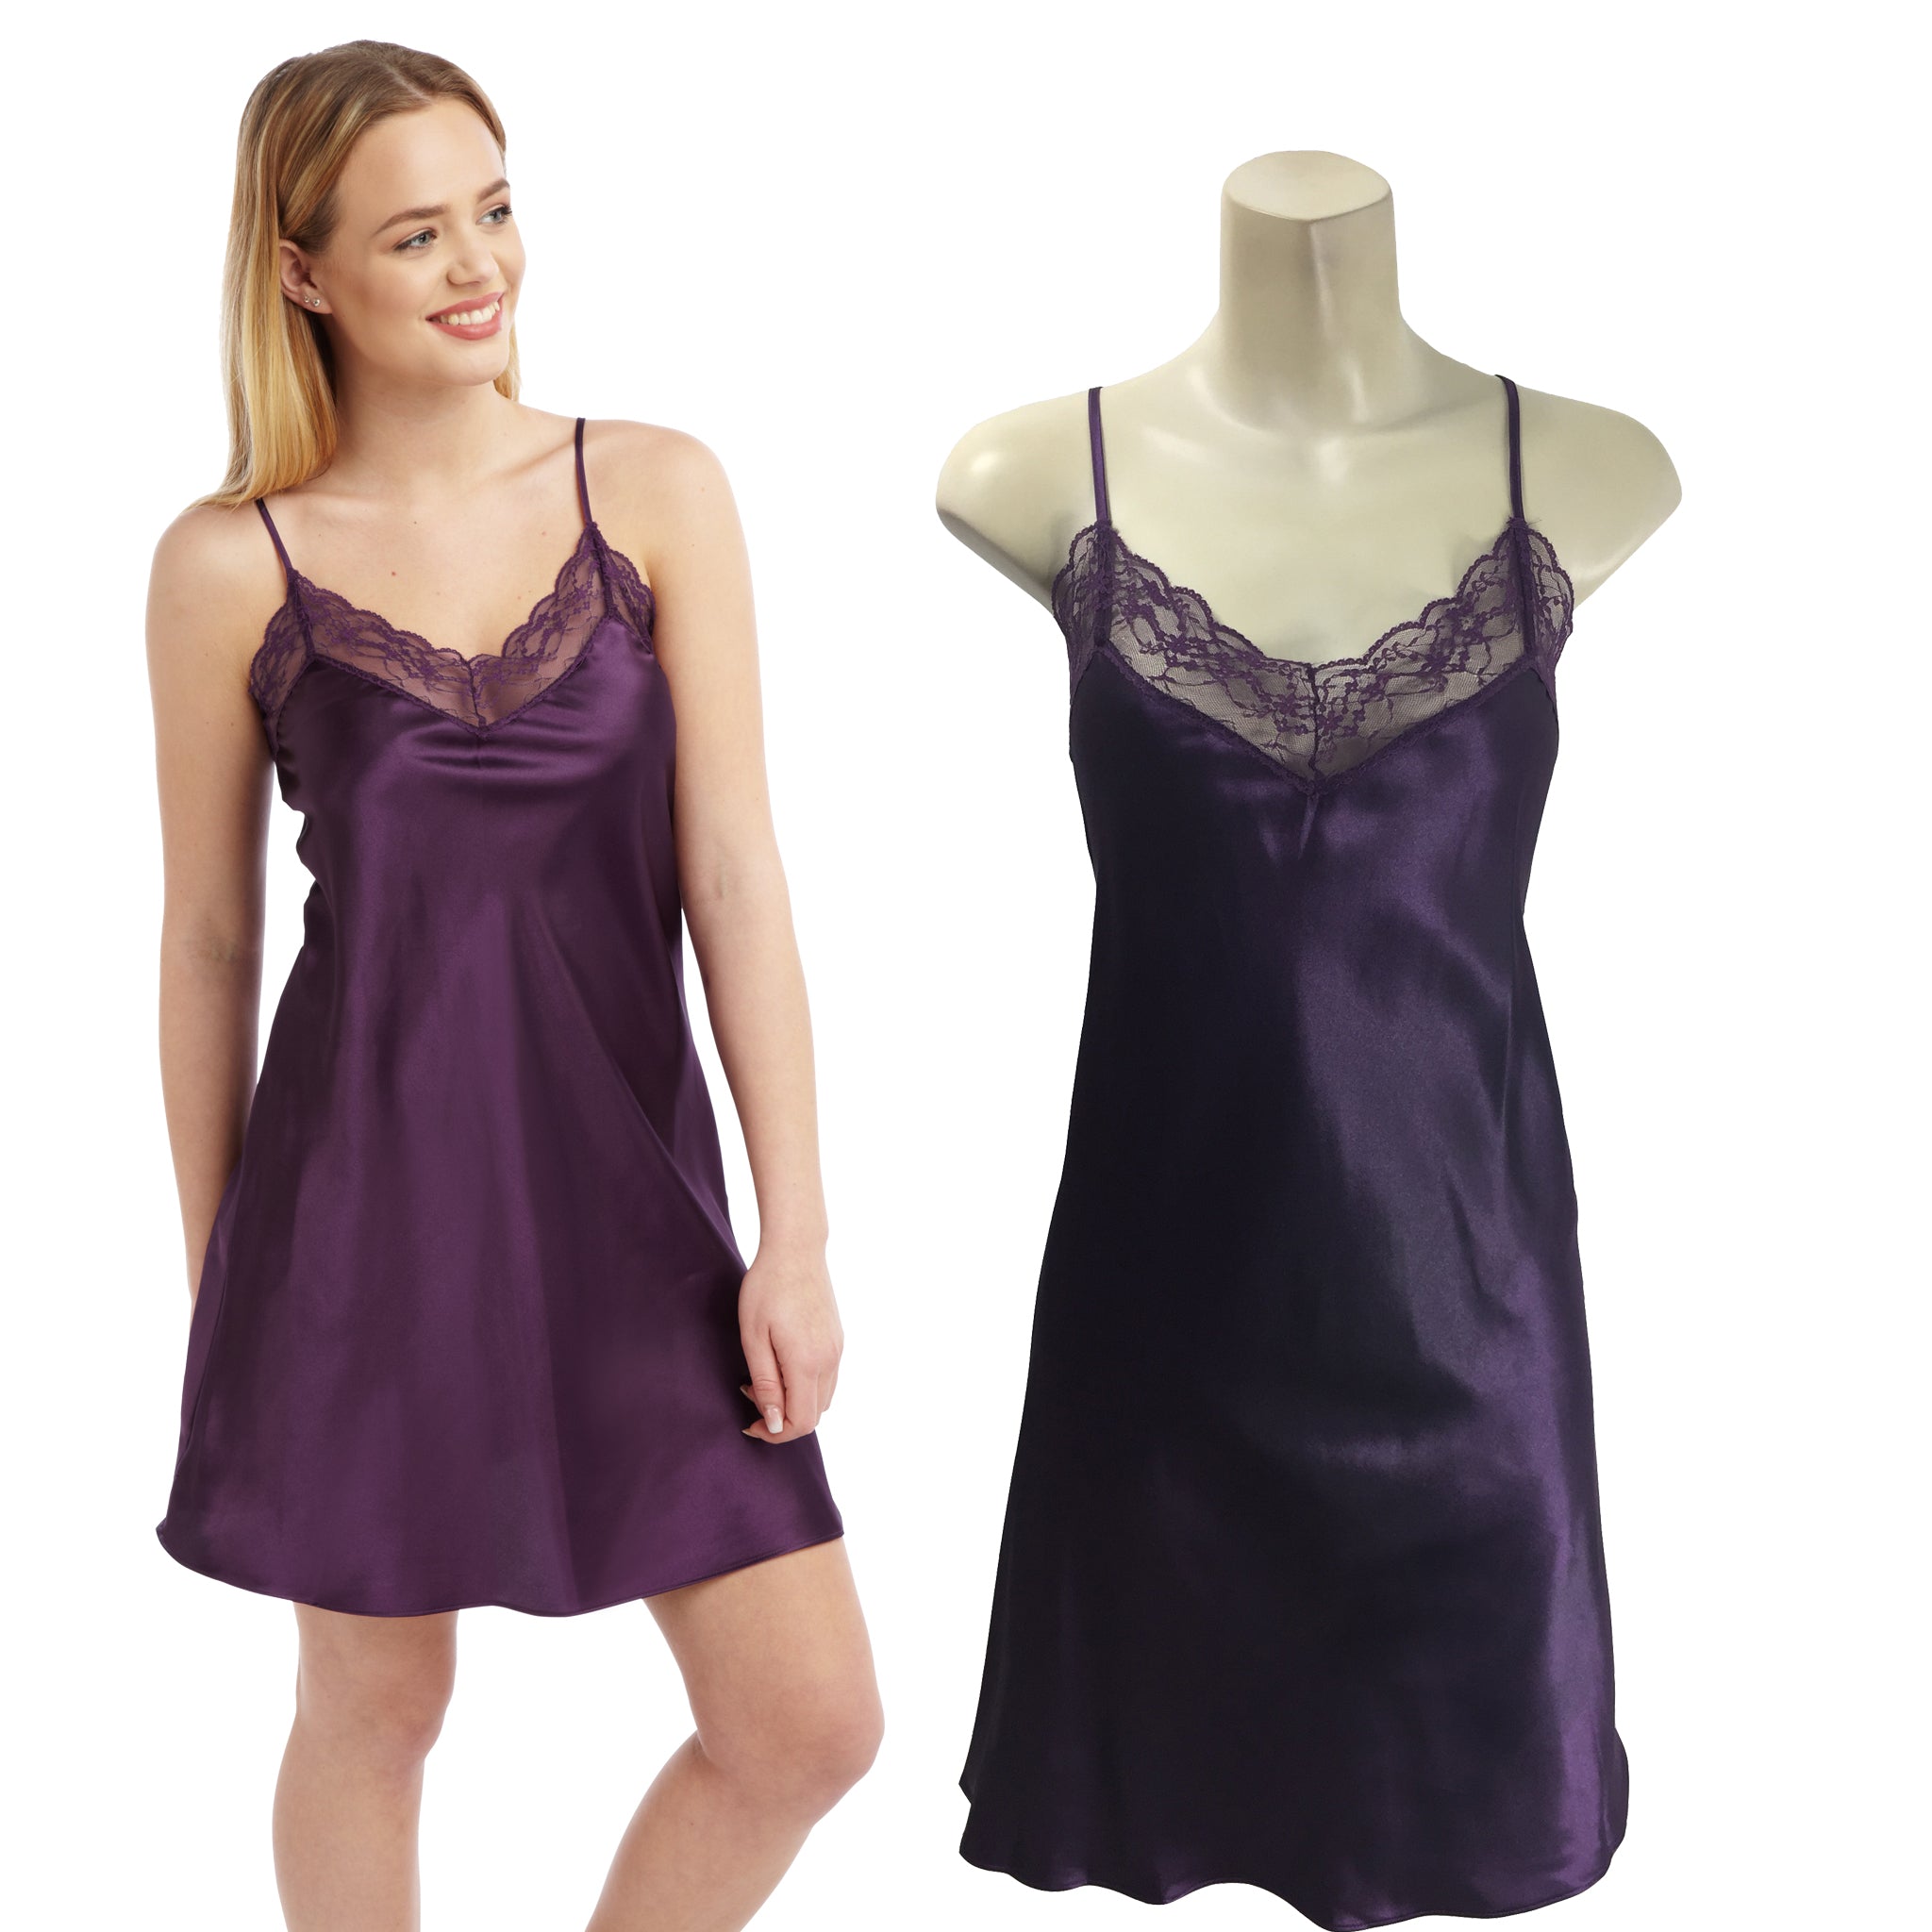 Plain Purple Sexy Satin Lace Chemise Nightie Negligee Lingerie PLUS SI –  Just For You Boutique®